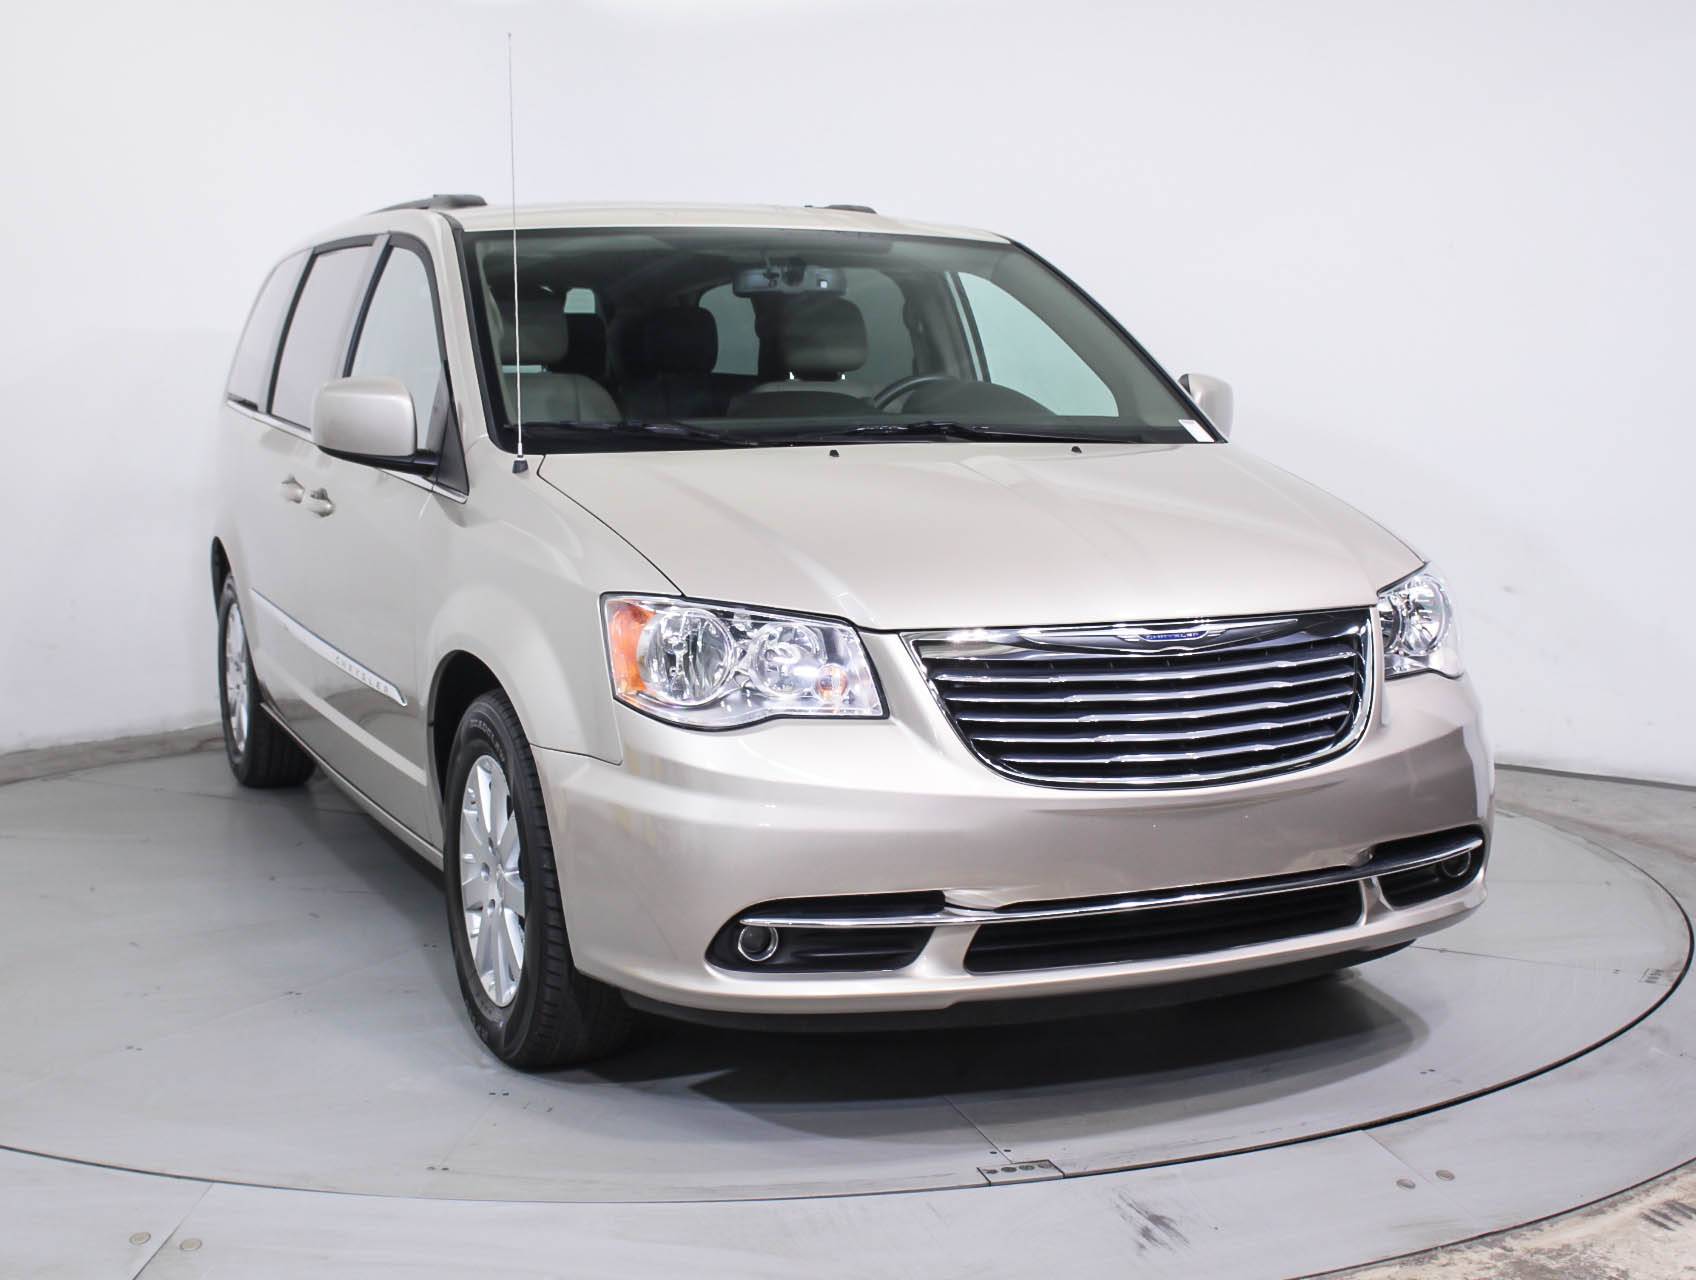 Florida Fine Cars - Used CHRYSLER TOWN & COUNTRY 2016 MIAMI TOURING